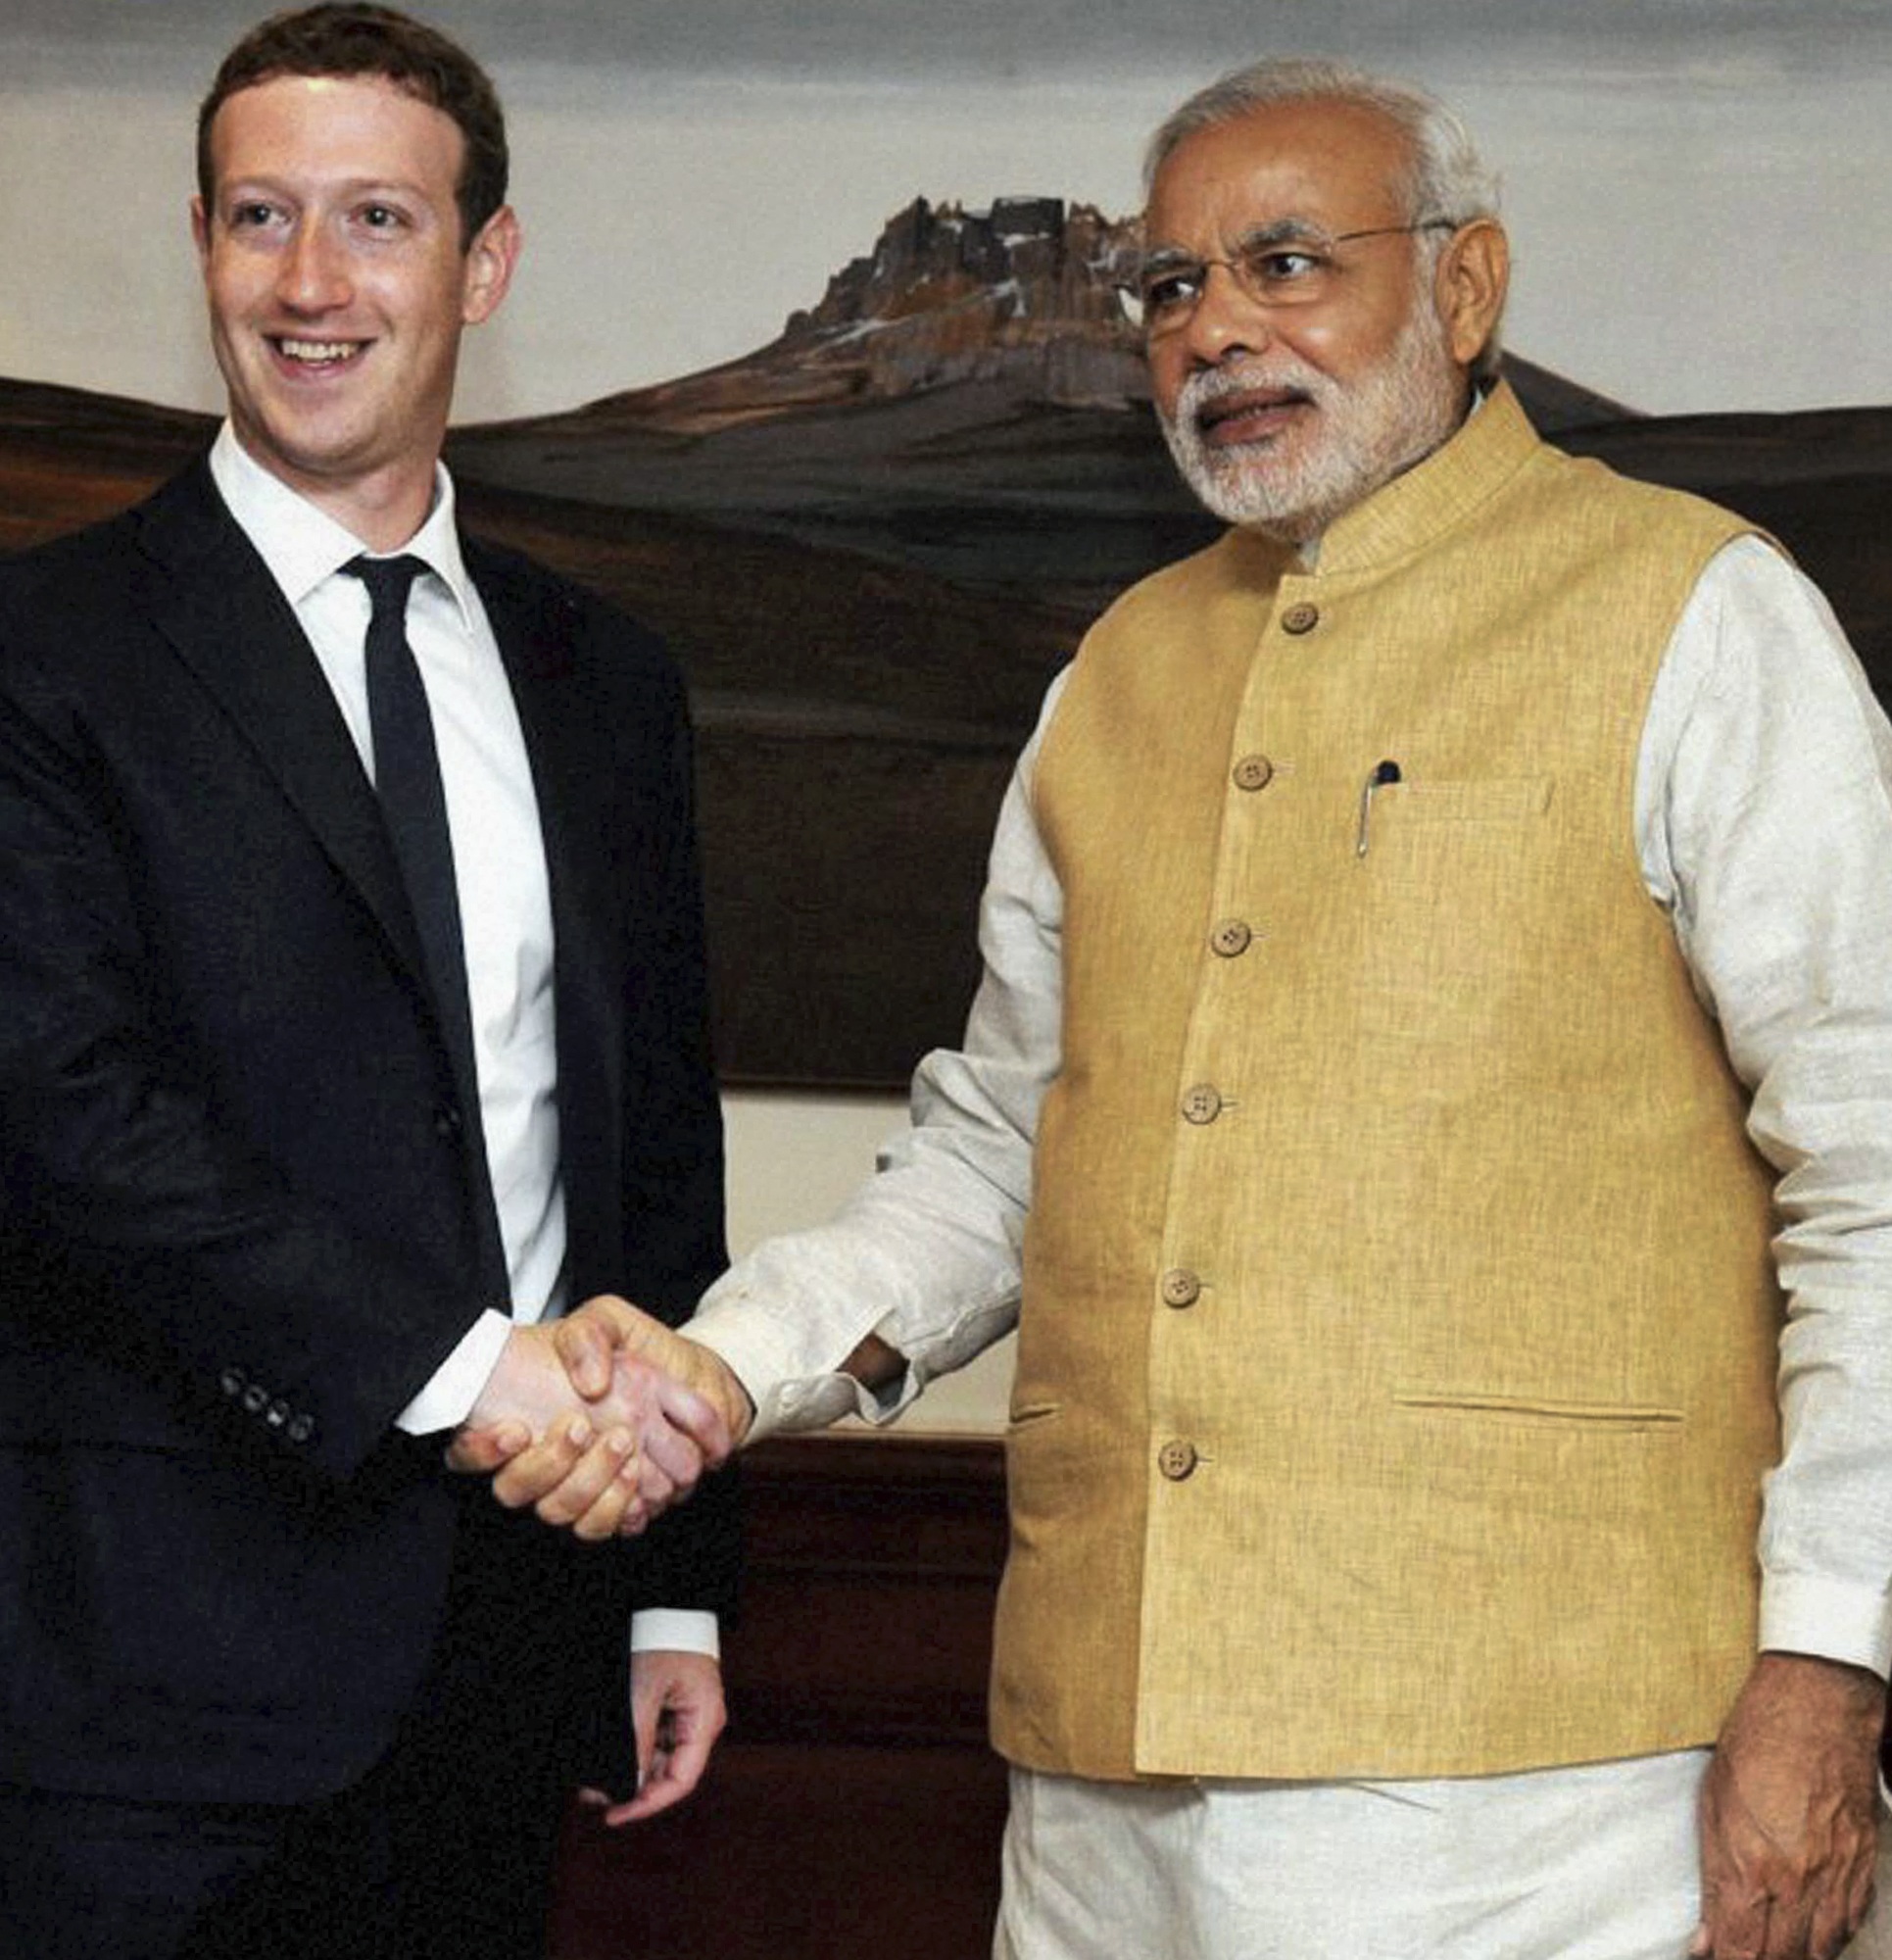 Indian Prime Minister Narendra Modi, right, shakes hands with Facebook CEO Mark Zuckerberg during a meeting in New Delhi on Oct. 10, 2014 (AP&mdash;AP)